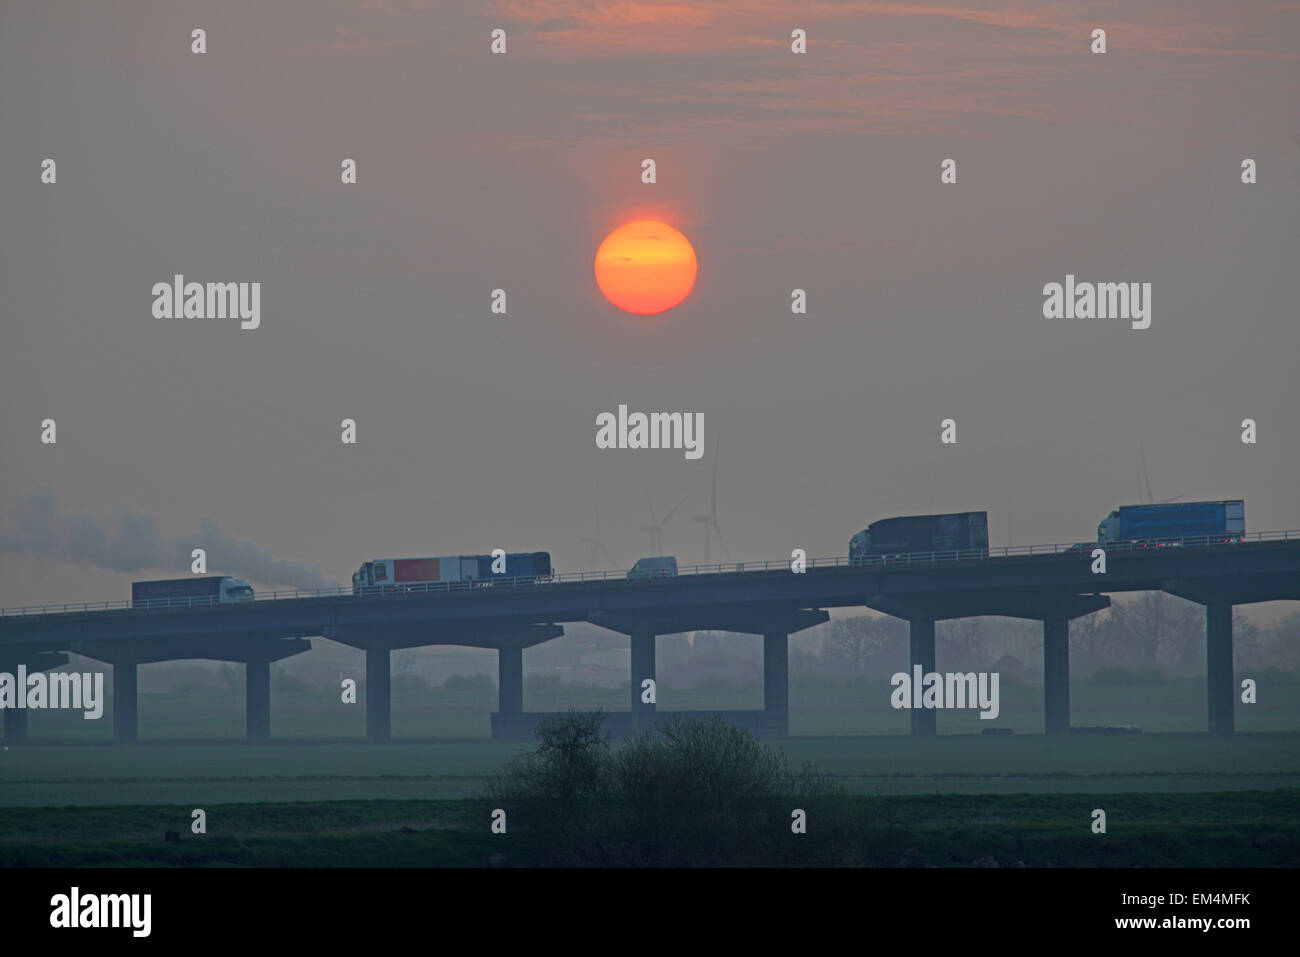 sunrise over traffic using the M62 motorway Ouse bridge crossing the river Ouse near Howden Yorkshire United Kingdom Stock Photo